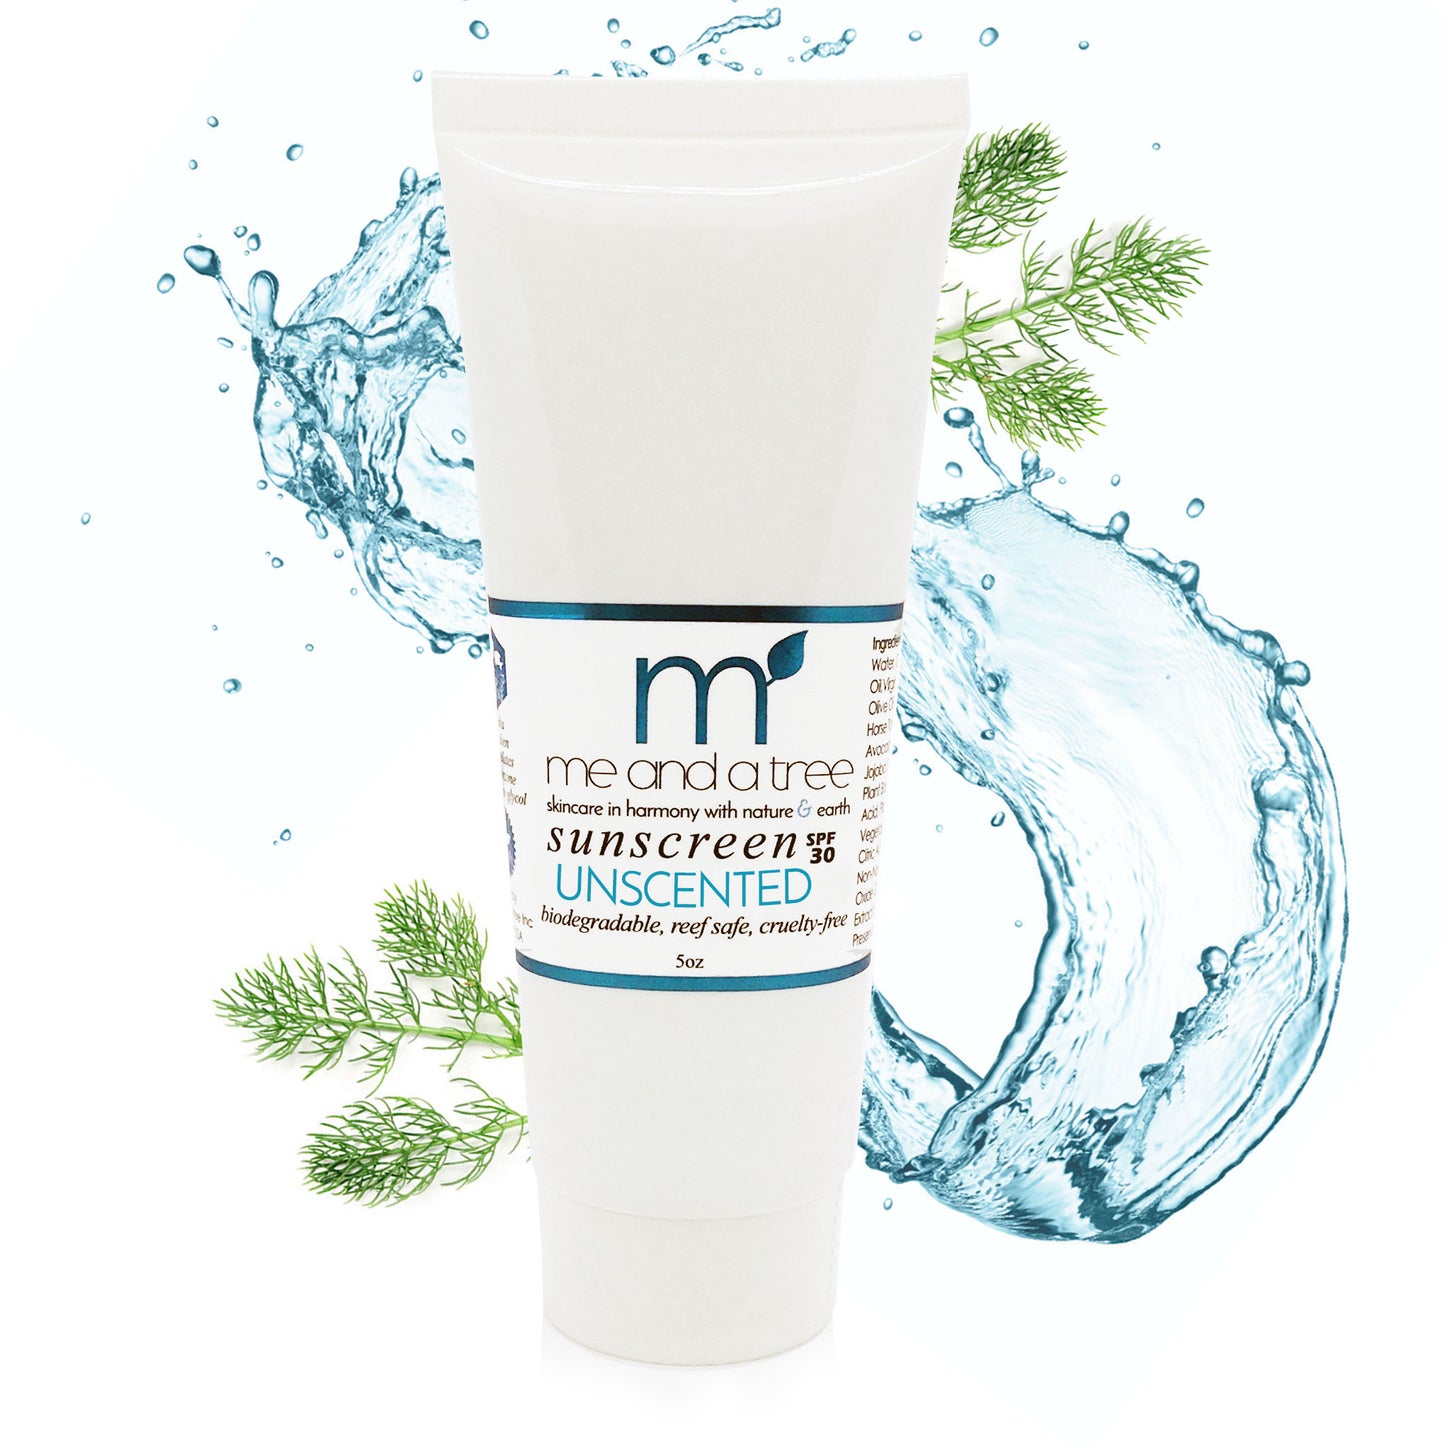 Natural Reef Safe Plant-based Sunscreen with Broad-Spectrum UVA/UVB Protection, enriched with nourishing oils like jojoba, borage, and olive fruit. Eco-friendly and free from harsh chemicals like avobenzone, oxybenzone, ecamsule, and octocrylene